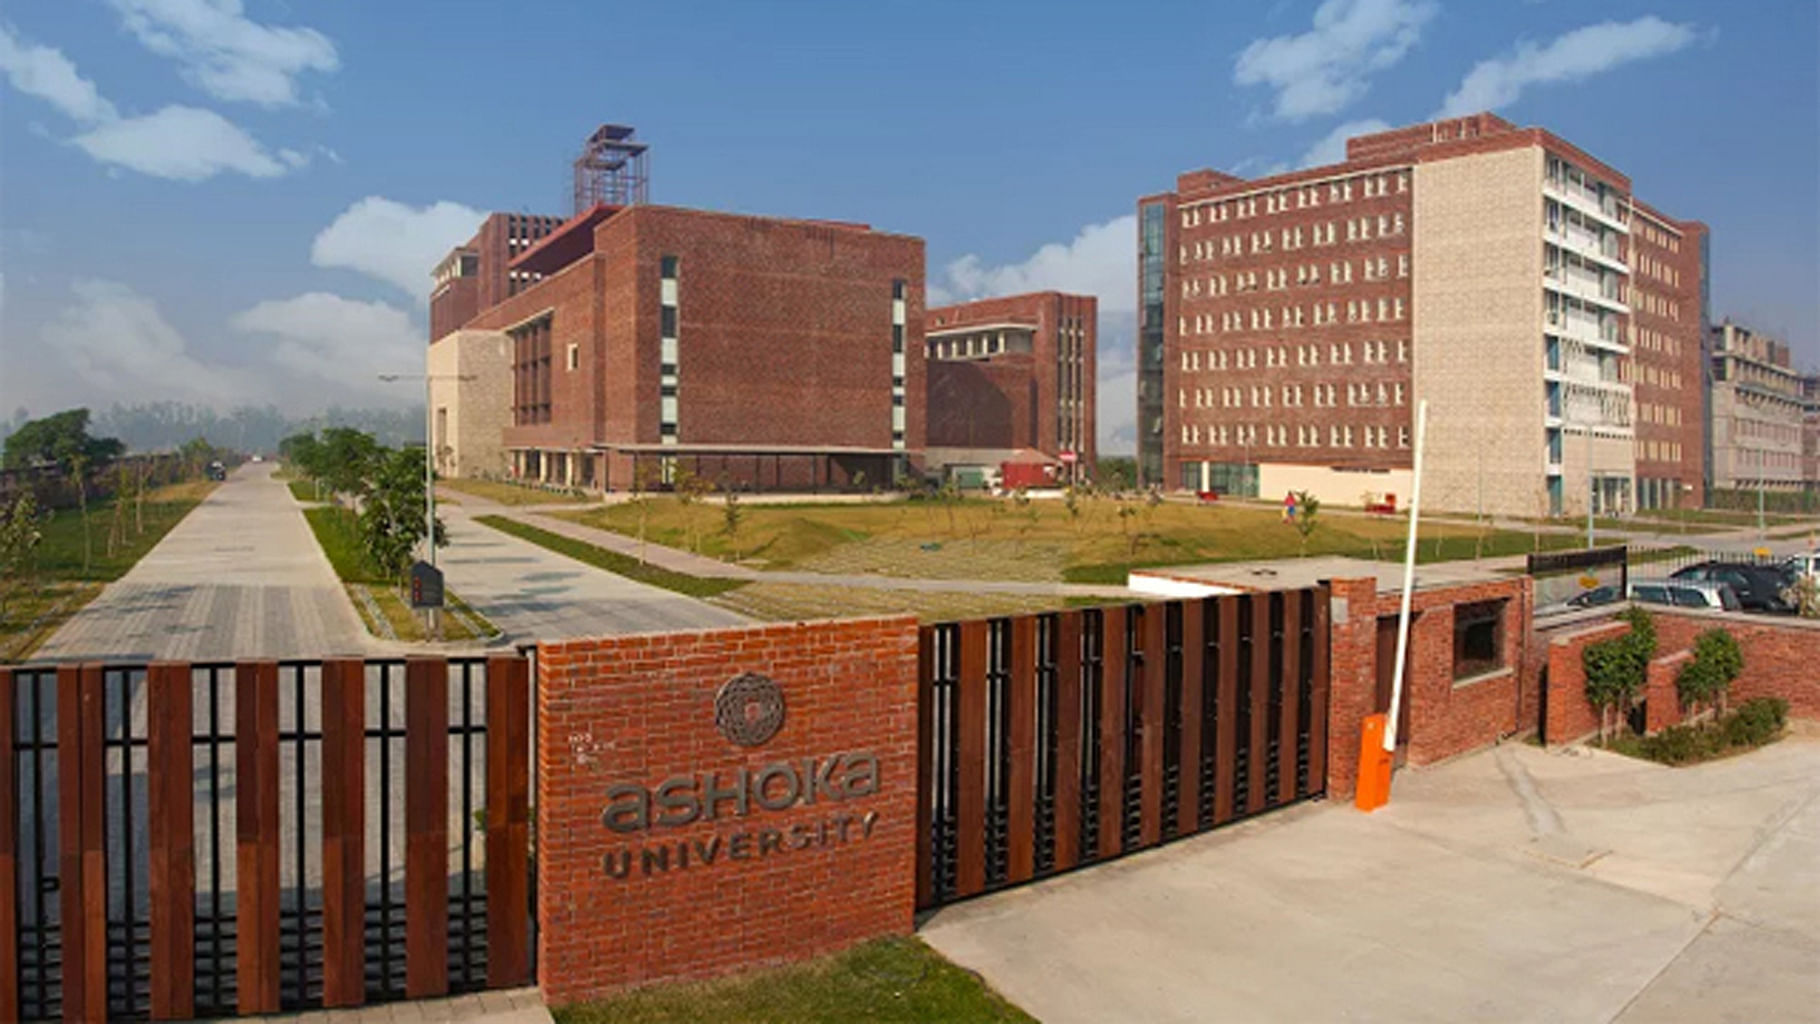 <div class="paragraphs"><p>Ashoka University in Sonepat, Haryana is India’s first liberal arts university seeking to provide an Ivy League-level education in the country. </p></div>